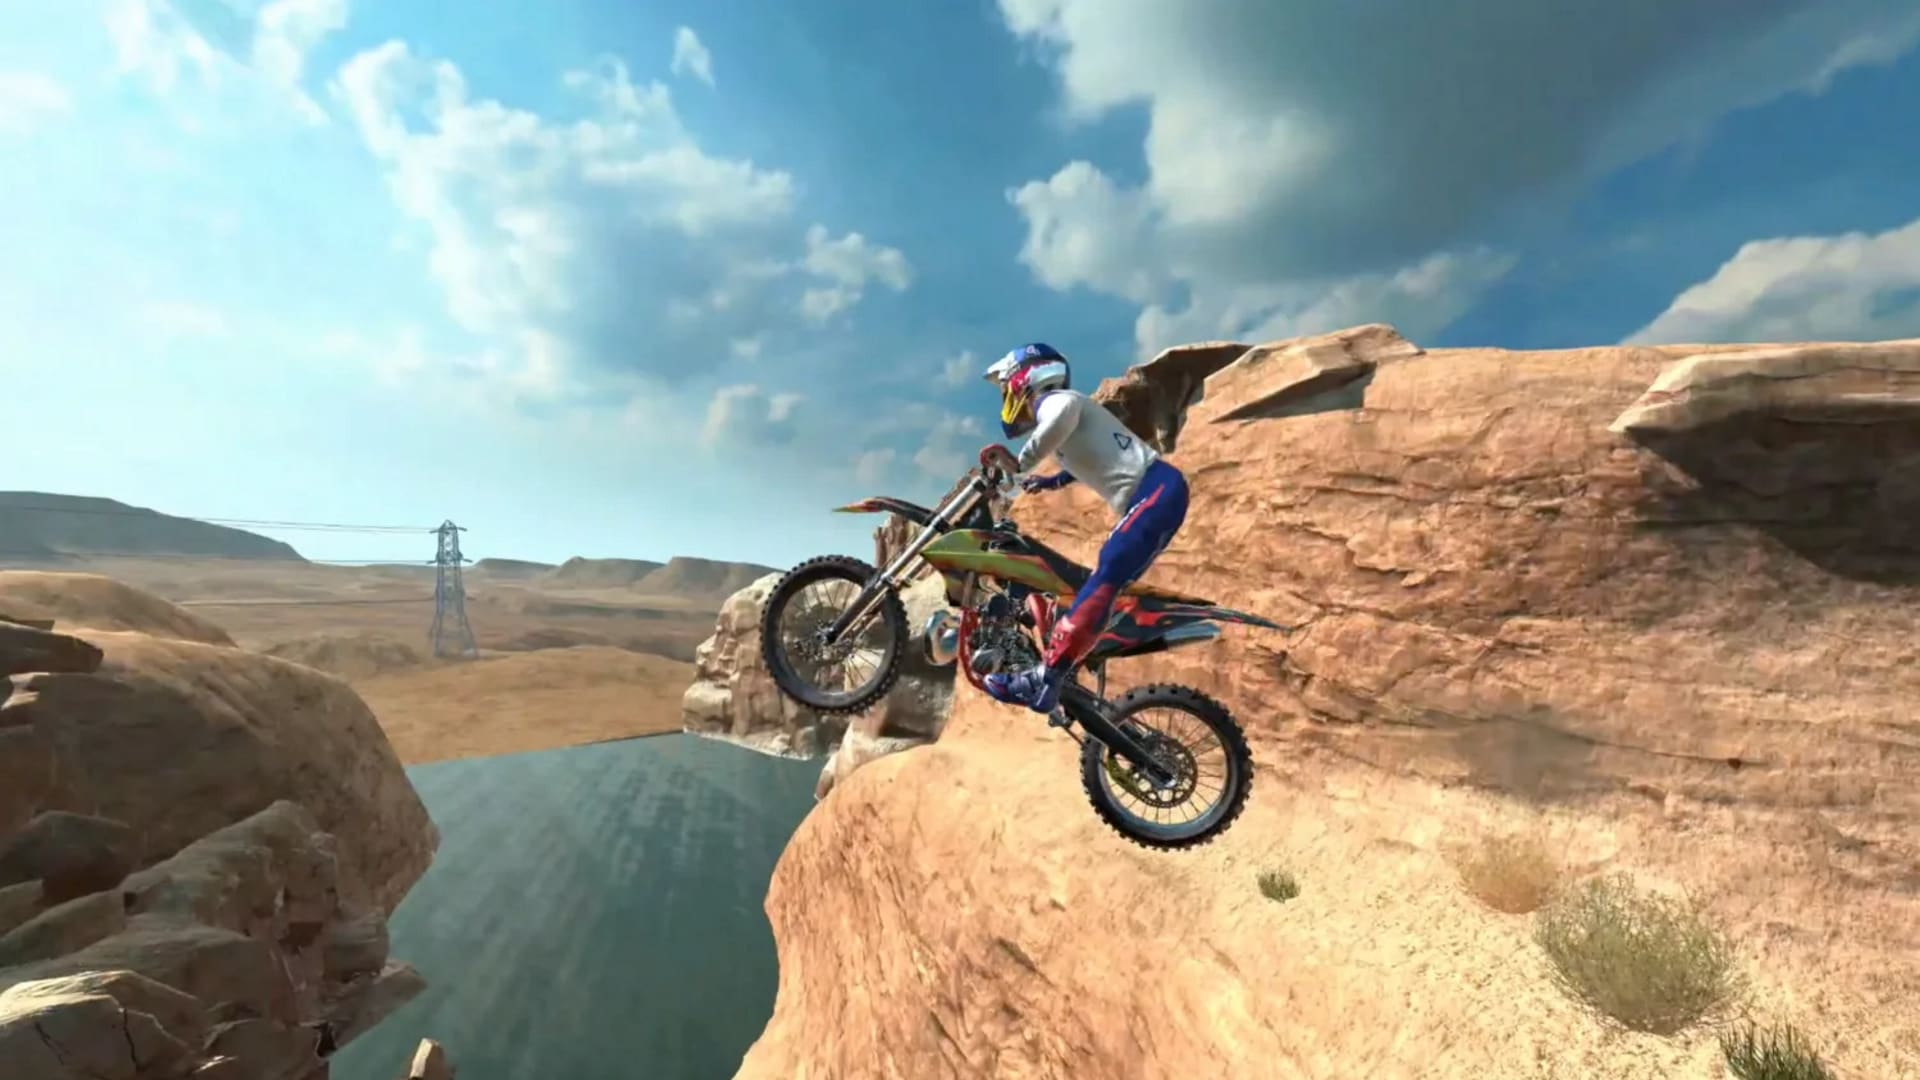 Best motocross games: The top 5 to play right now